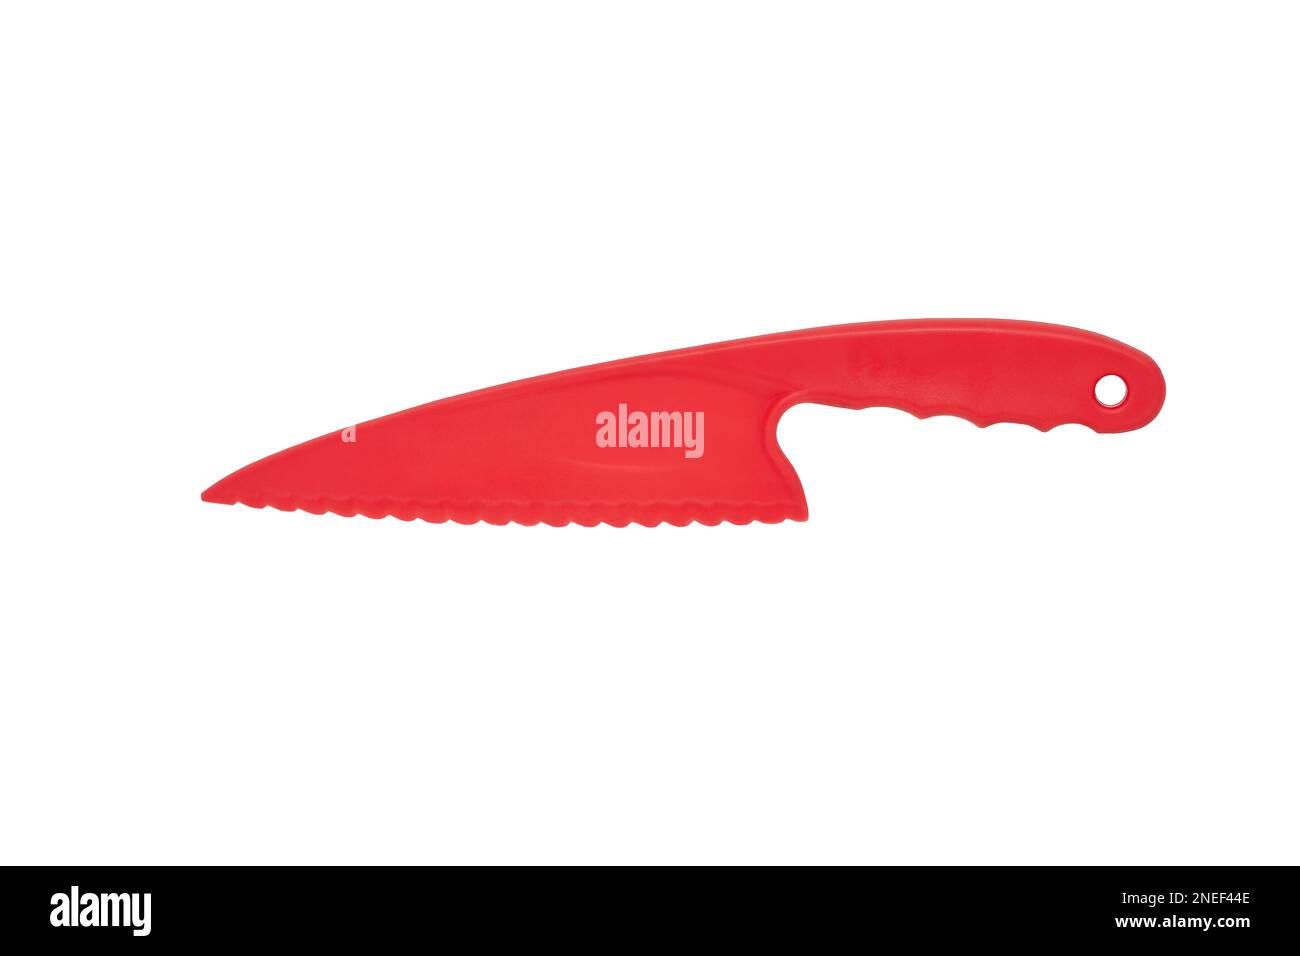 Image of a plastic knife of red color for cutting a cake on a white background Stock Photo